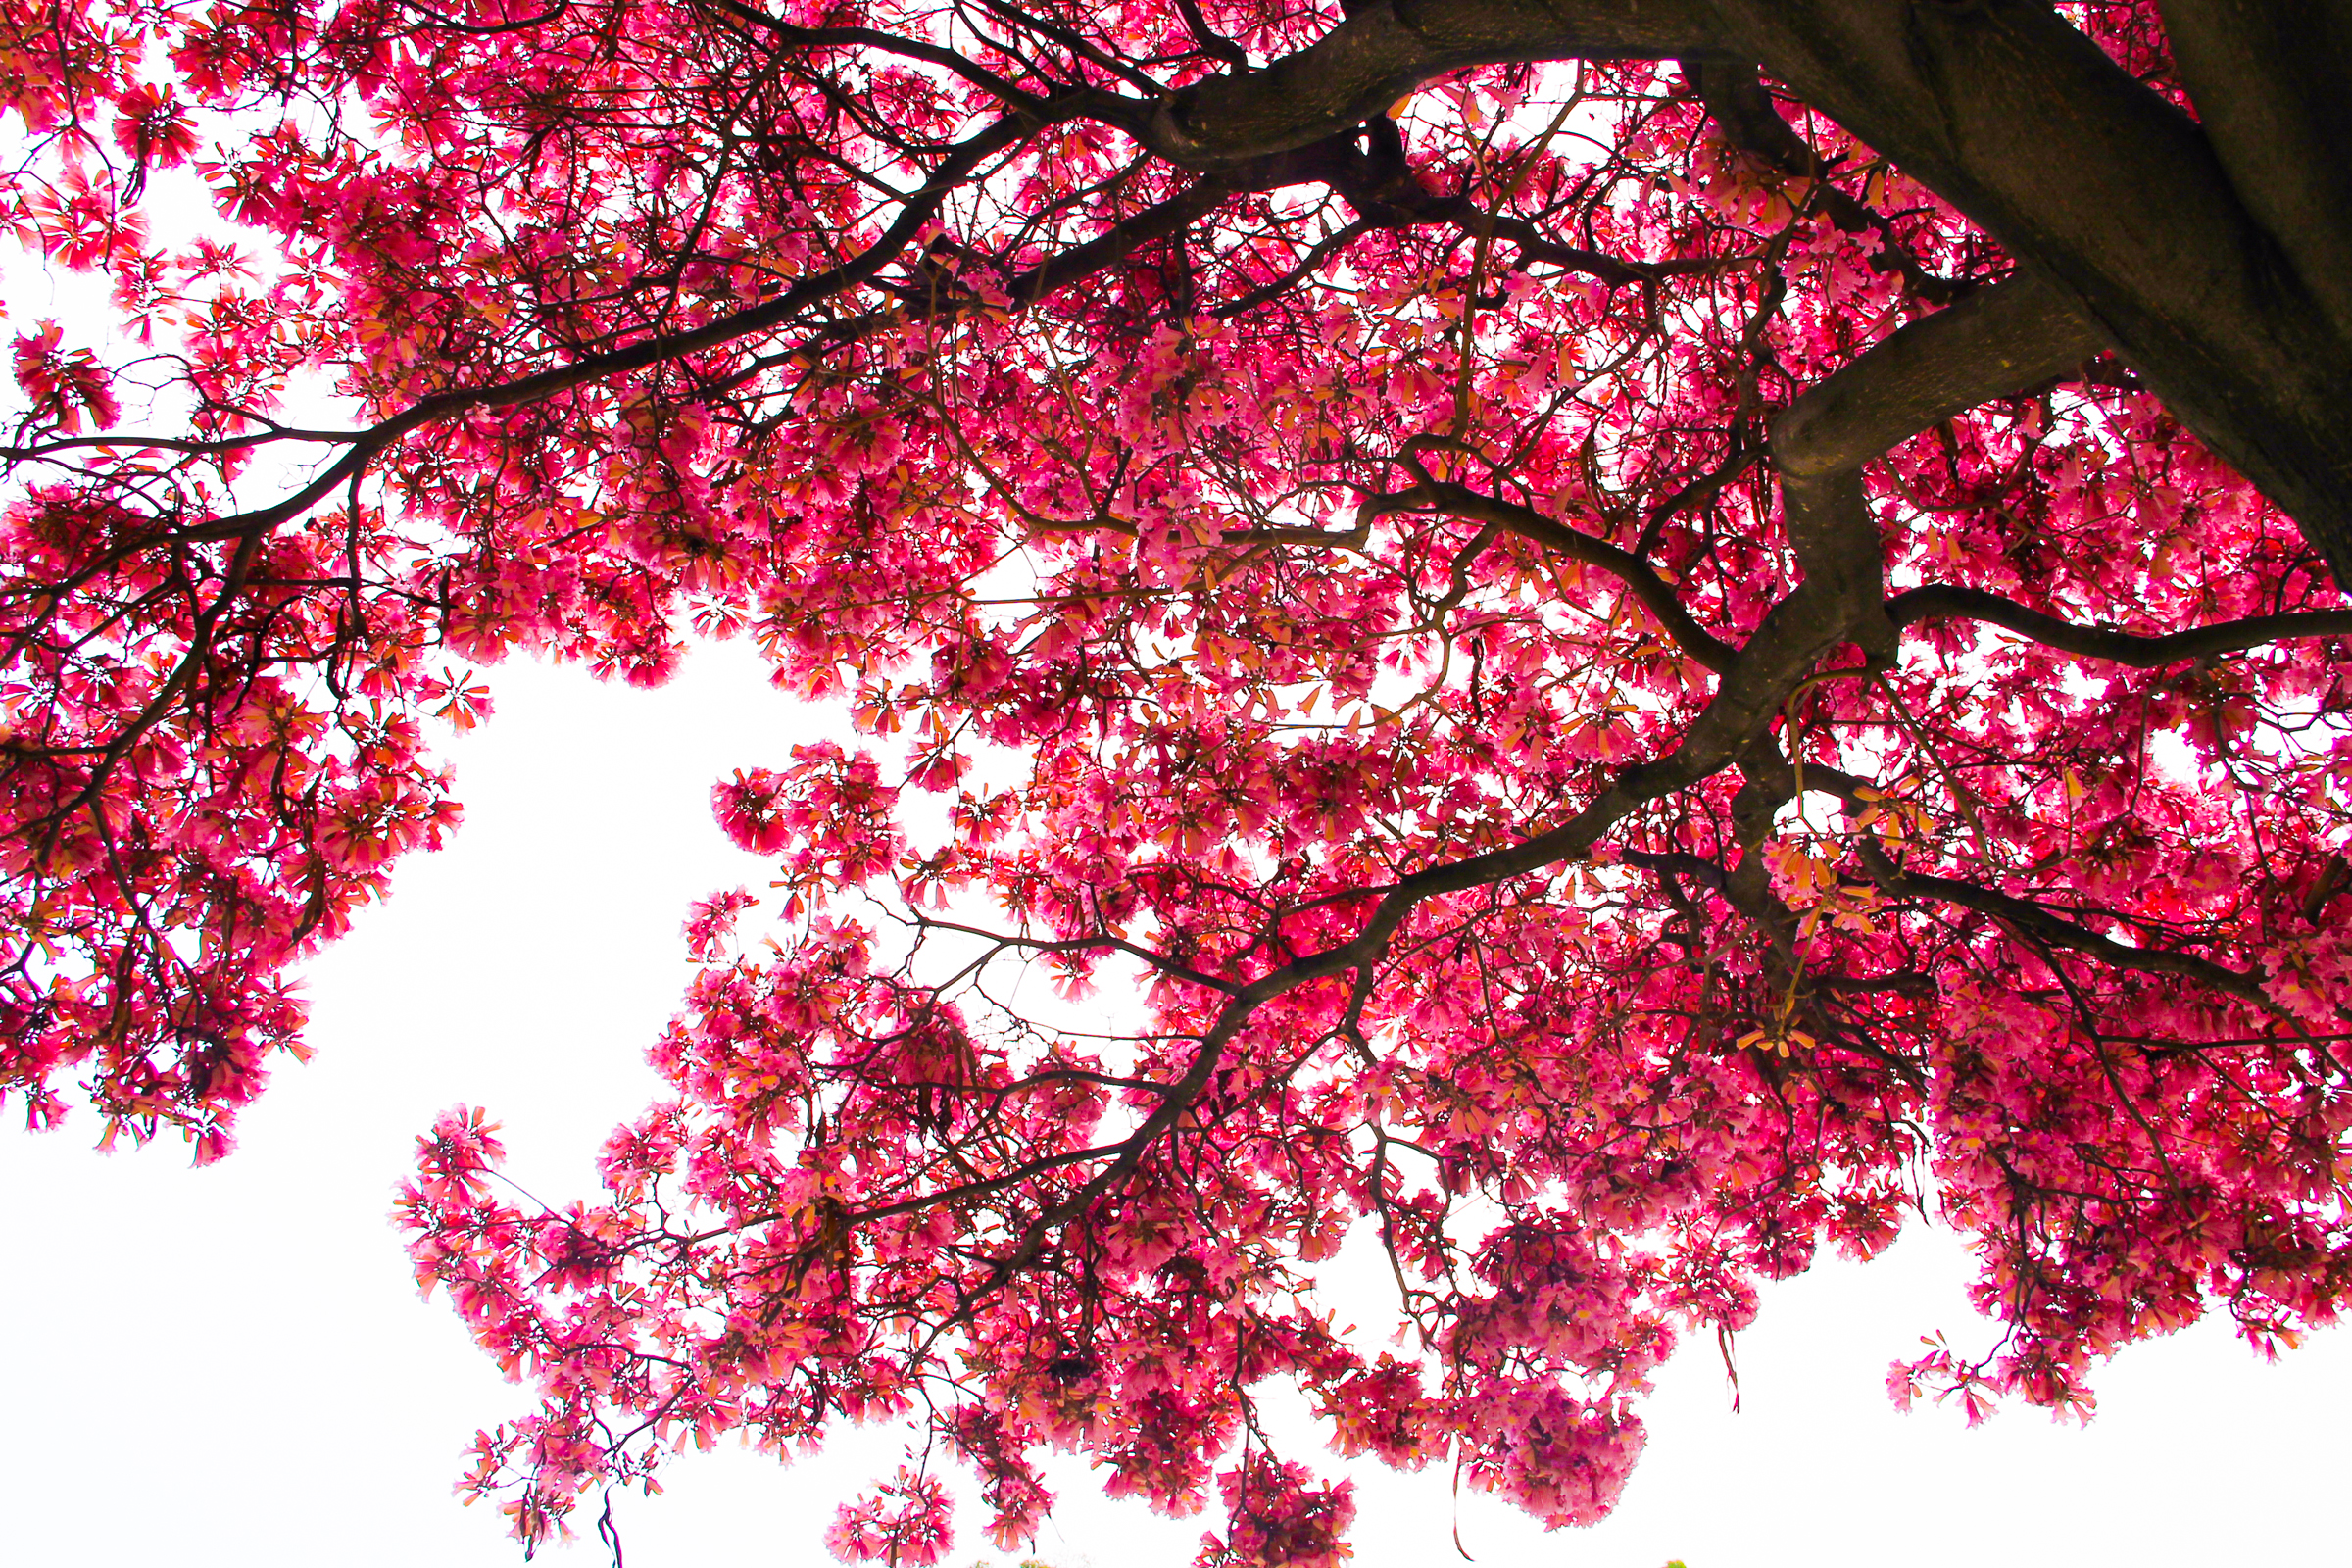 Free Stock Photo of Looking Up At Cherry Blossom Tree & Branches